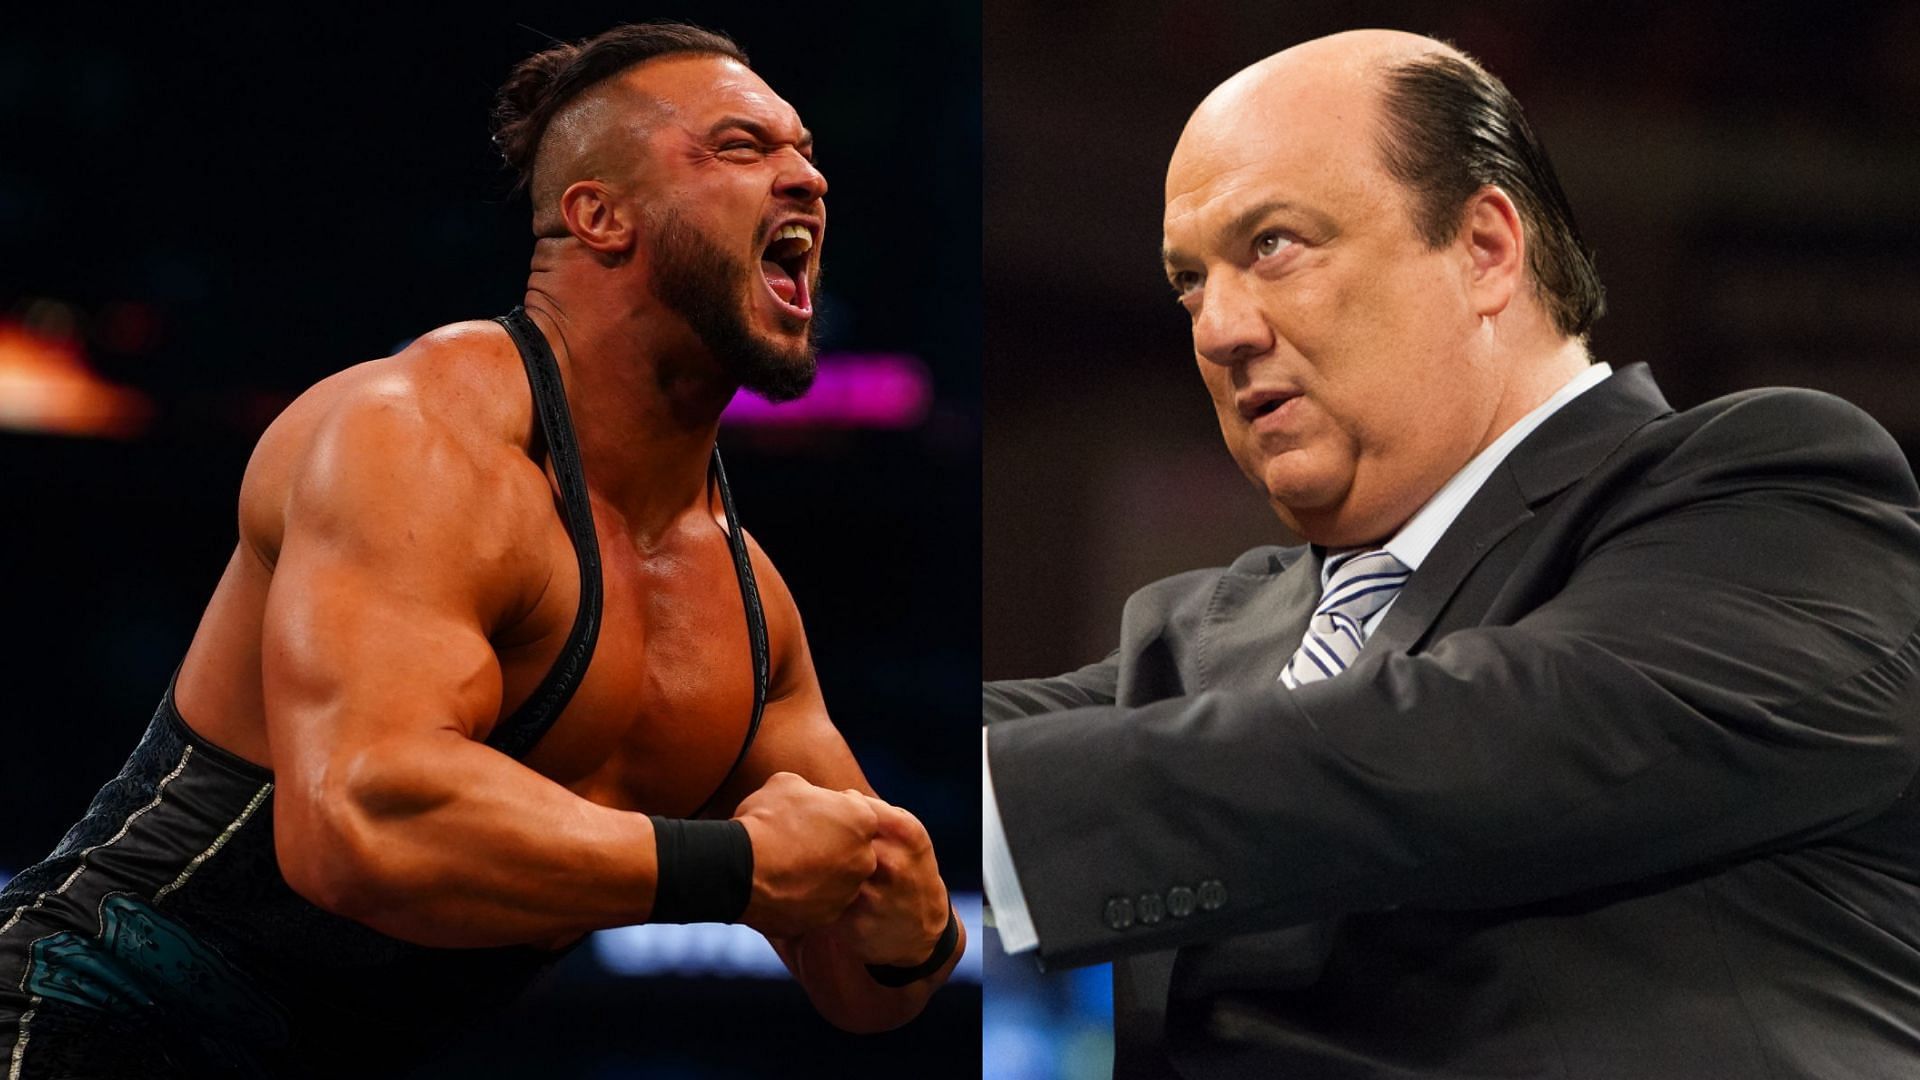 Which AEW wrestlers would Paul Heyman (right) be the perfect manager for?